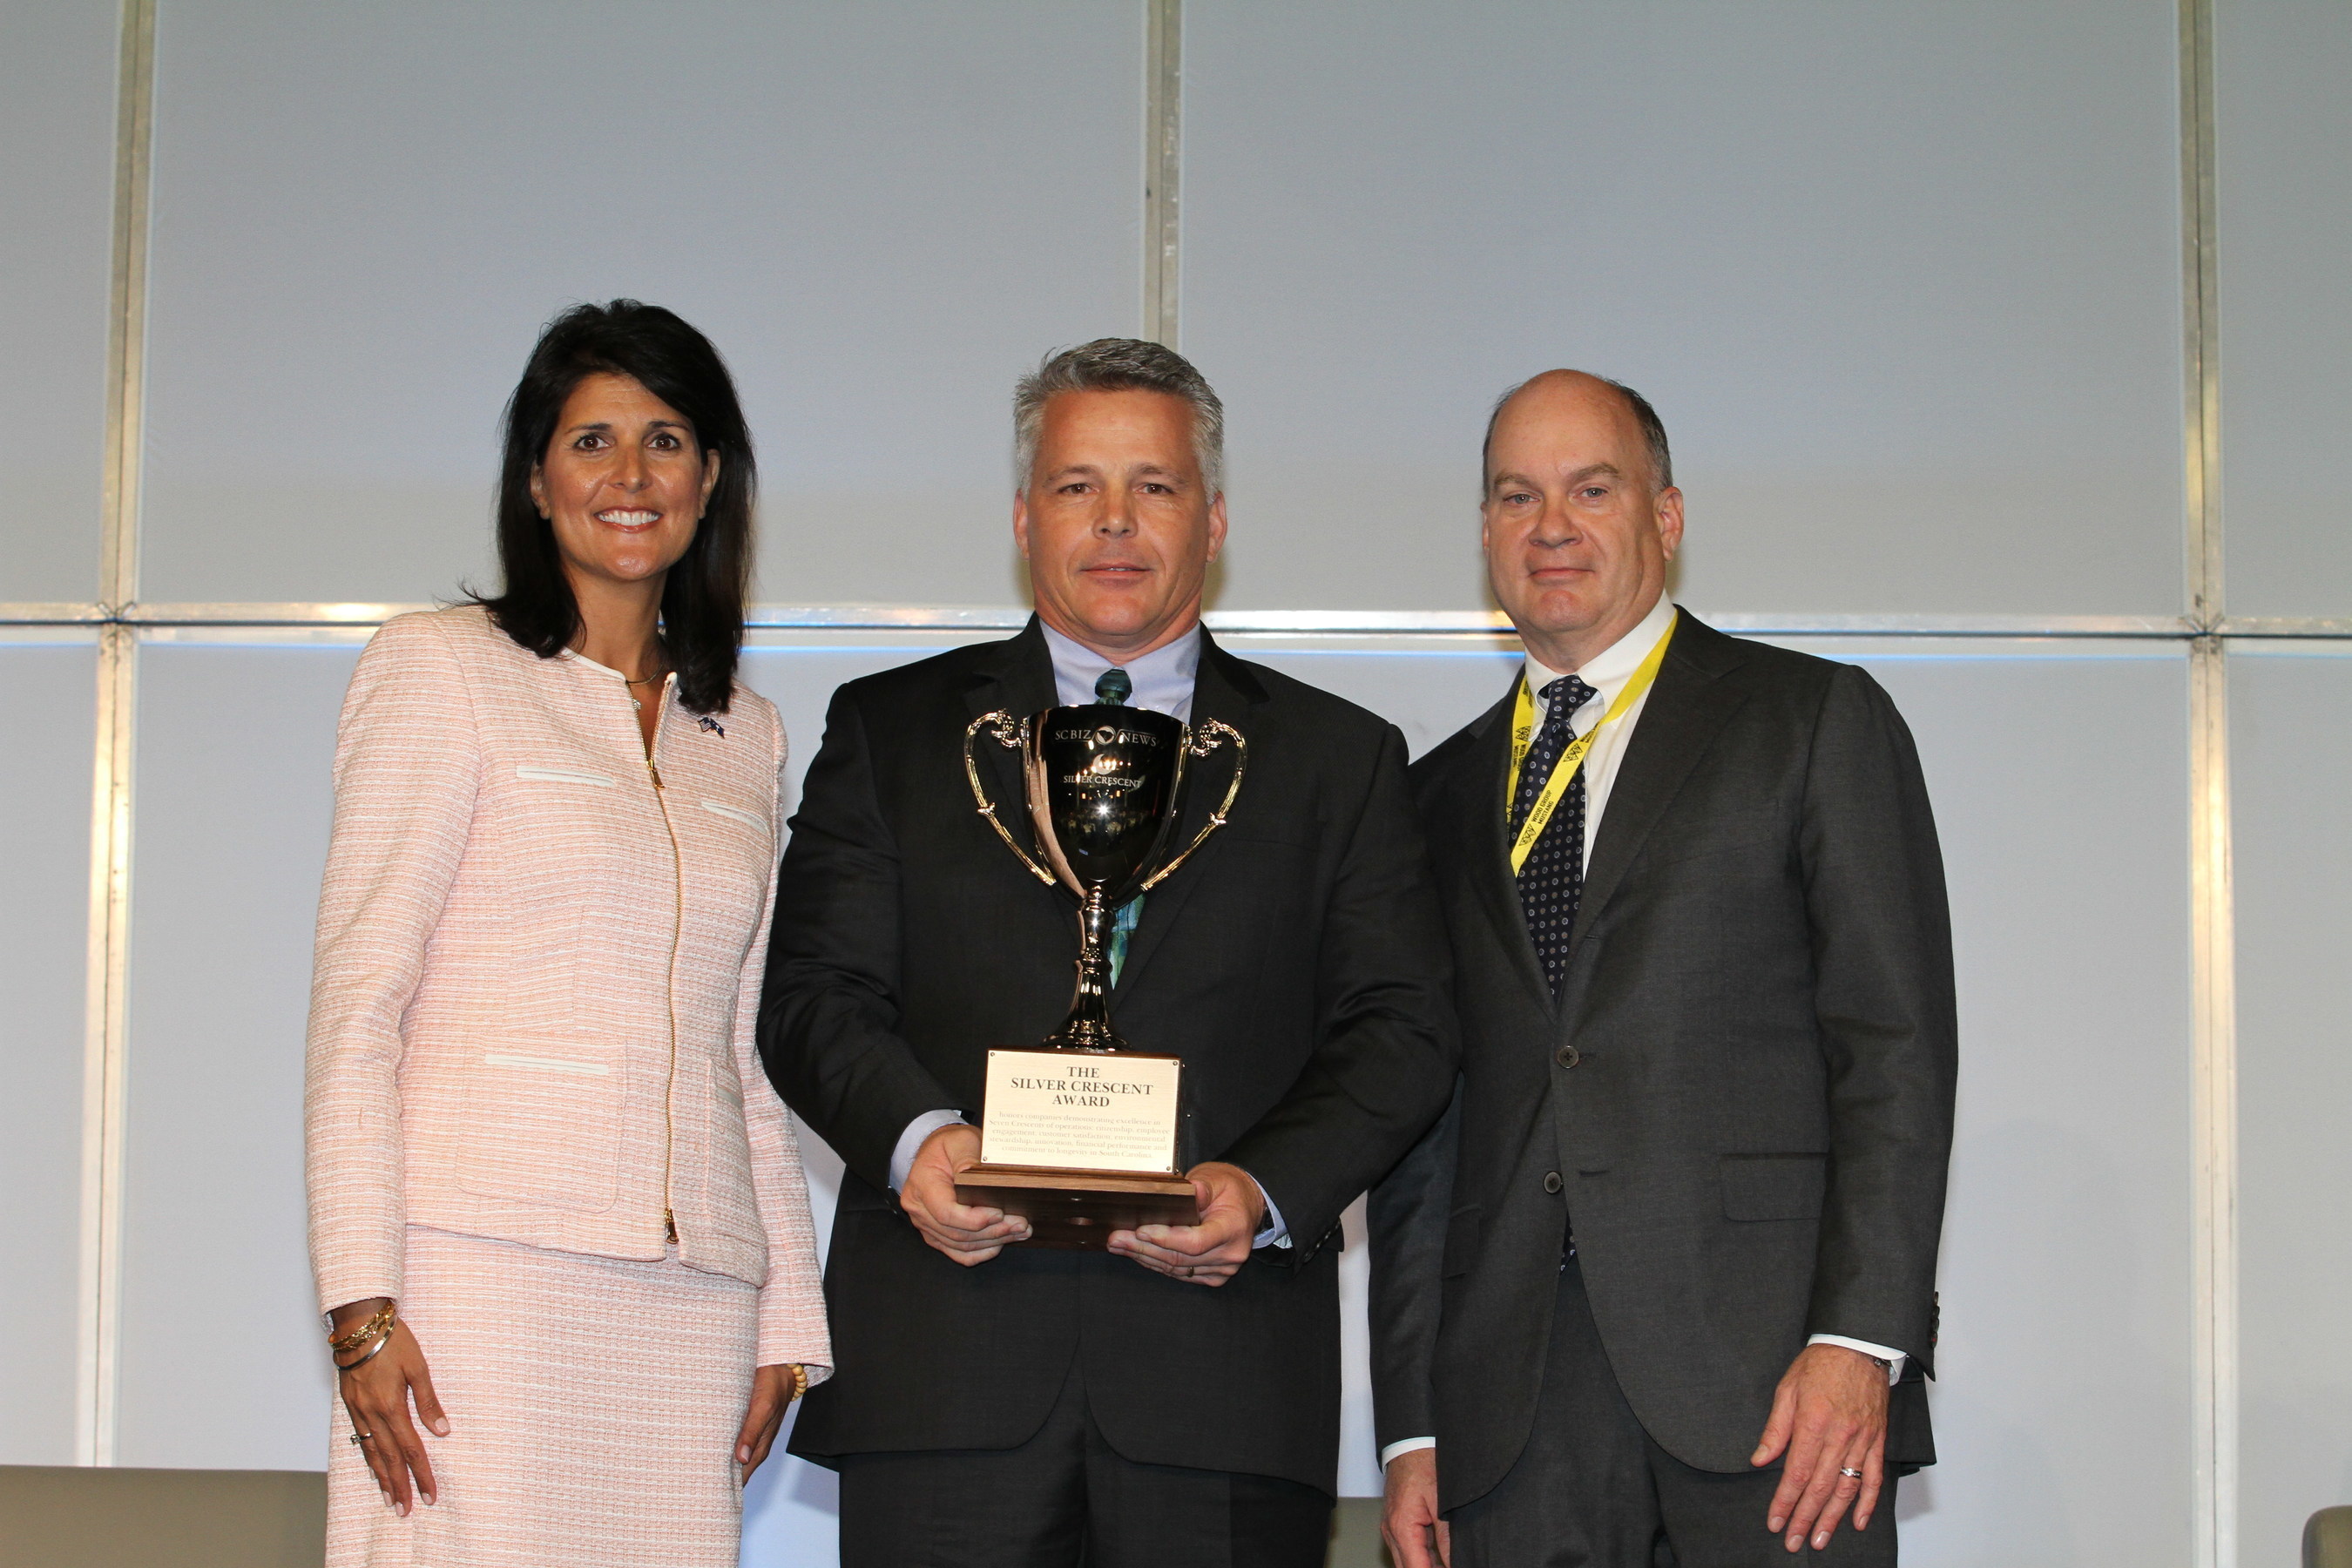 Chris Walsh, Seneca Plant Manager, BorgWarner TorqTransfer Systems (center), accepts a 2015 Silver Crescent Award for Manufacturing Excellence from South Carolina Governor Nikki Haley (left) and H. Lynn Harton, President and Chief Operating Officer, United Community Bank (right), during the South Carolina Manufacturing Conference and Expo.